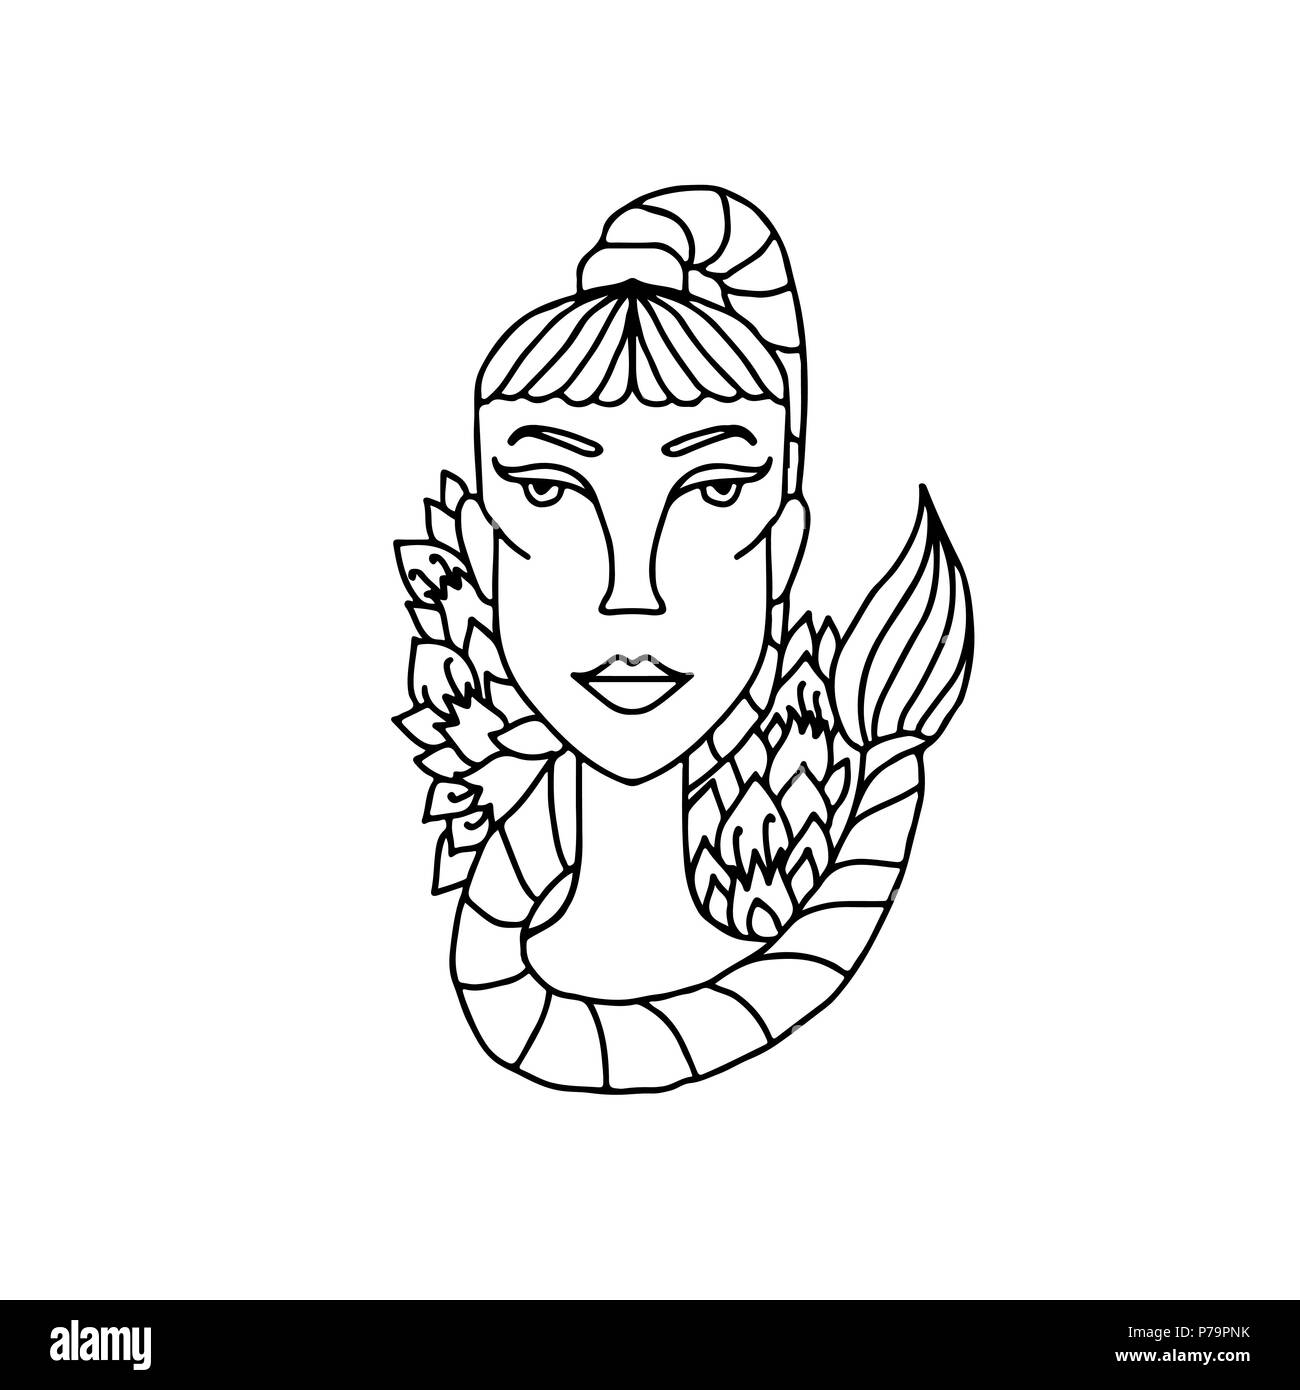 Scorpio girl portrait. Zodiac sign for adult coloring book. Simple black and white vector illustration. Stock Vector